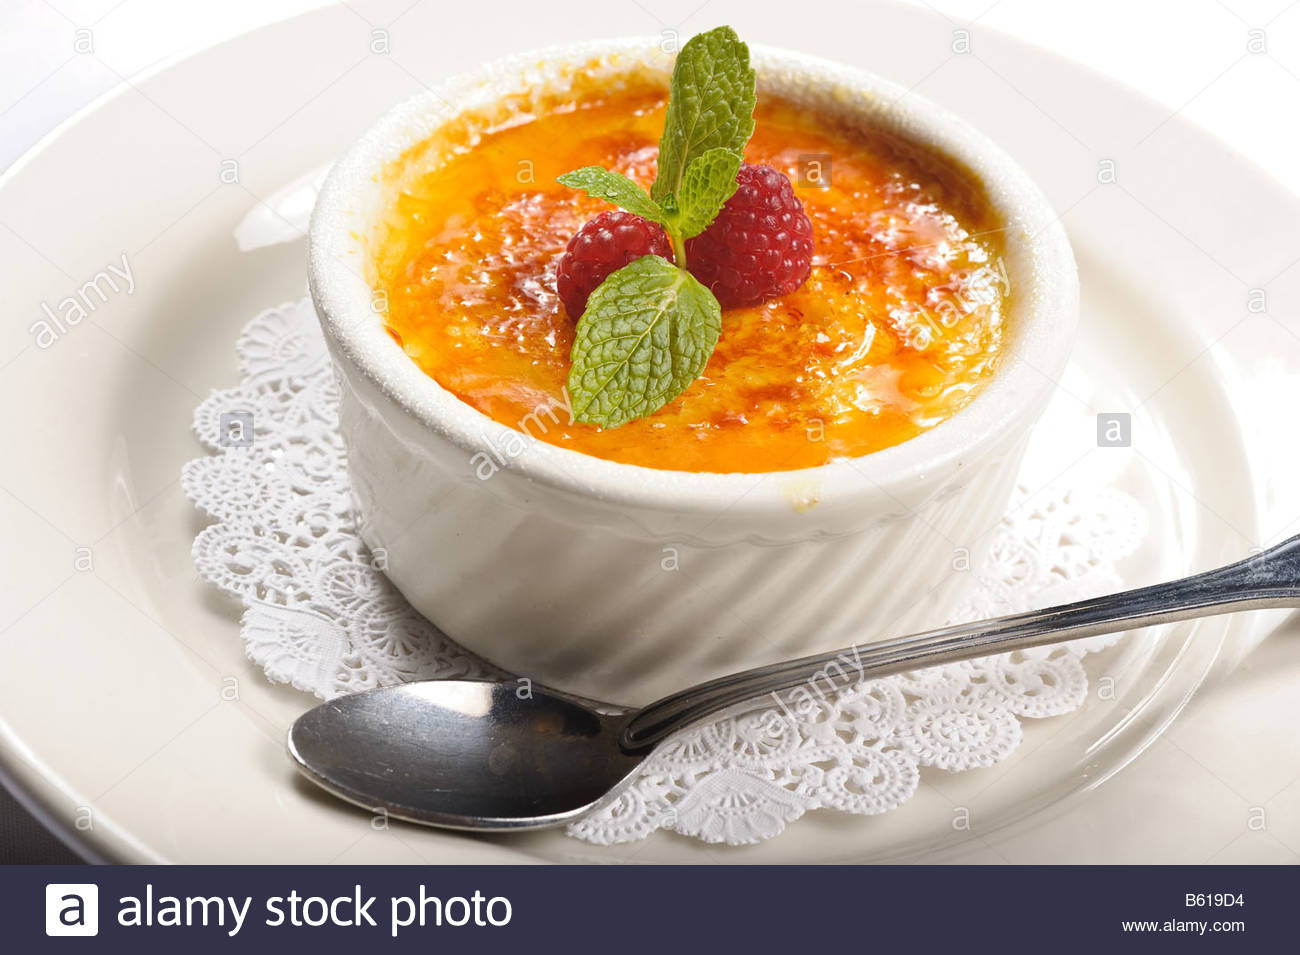 Creme Brulee Dessert
 Creme Brulee dessert in small dish on a plate with spoon